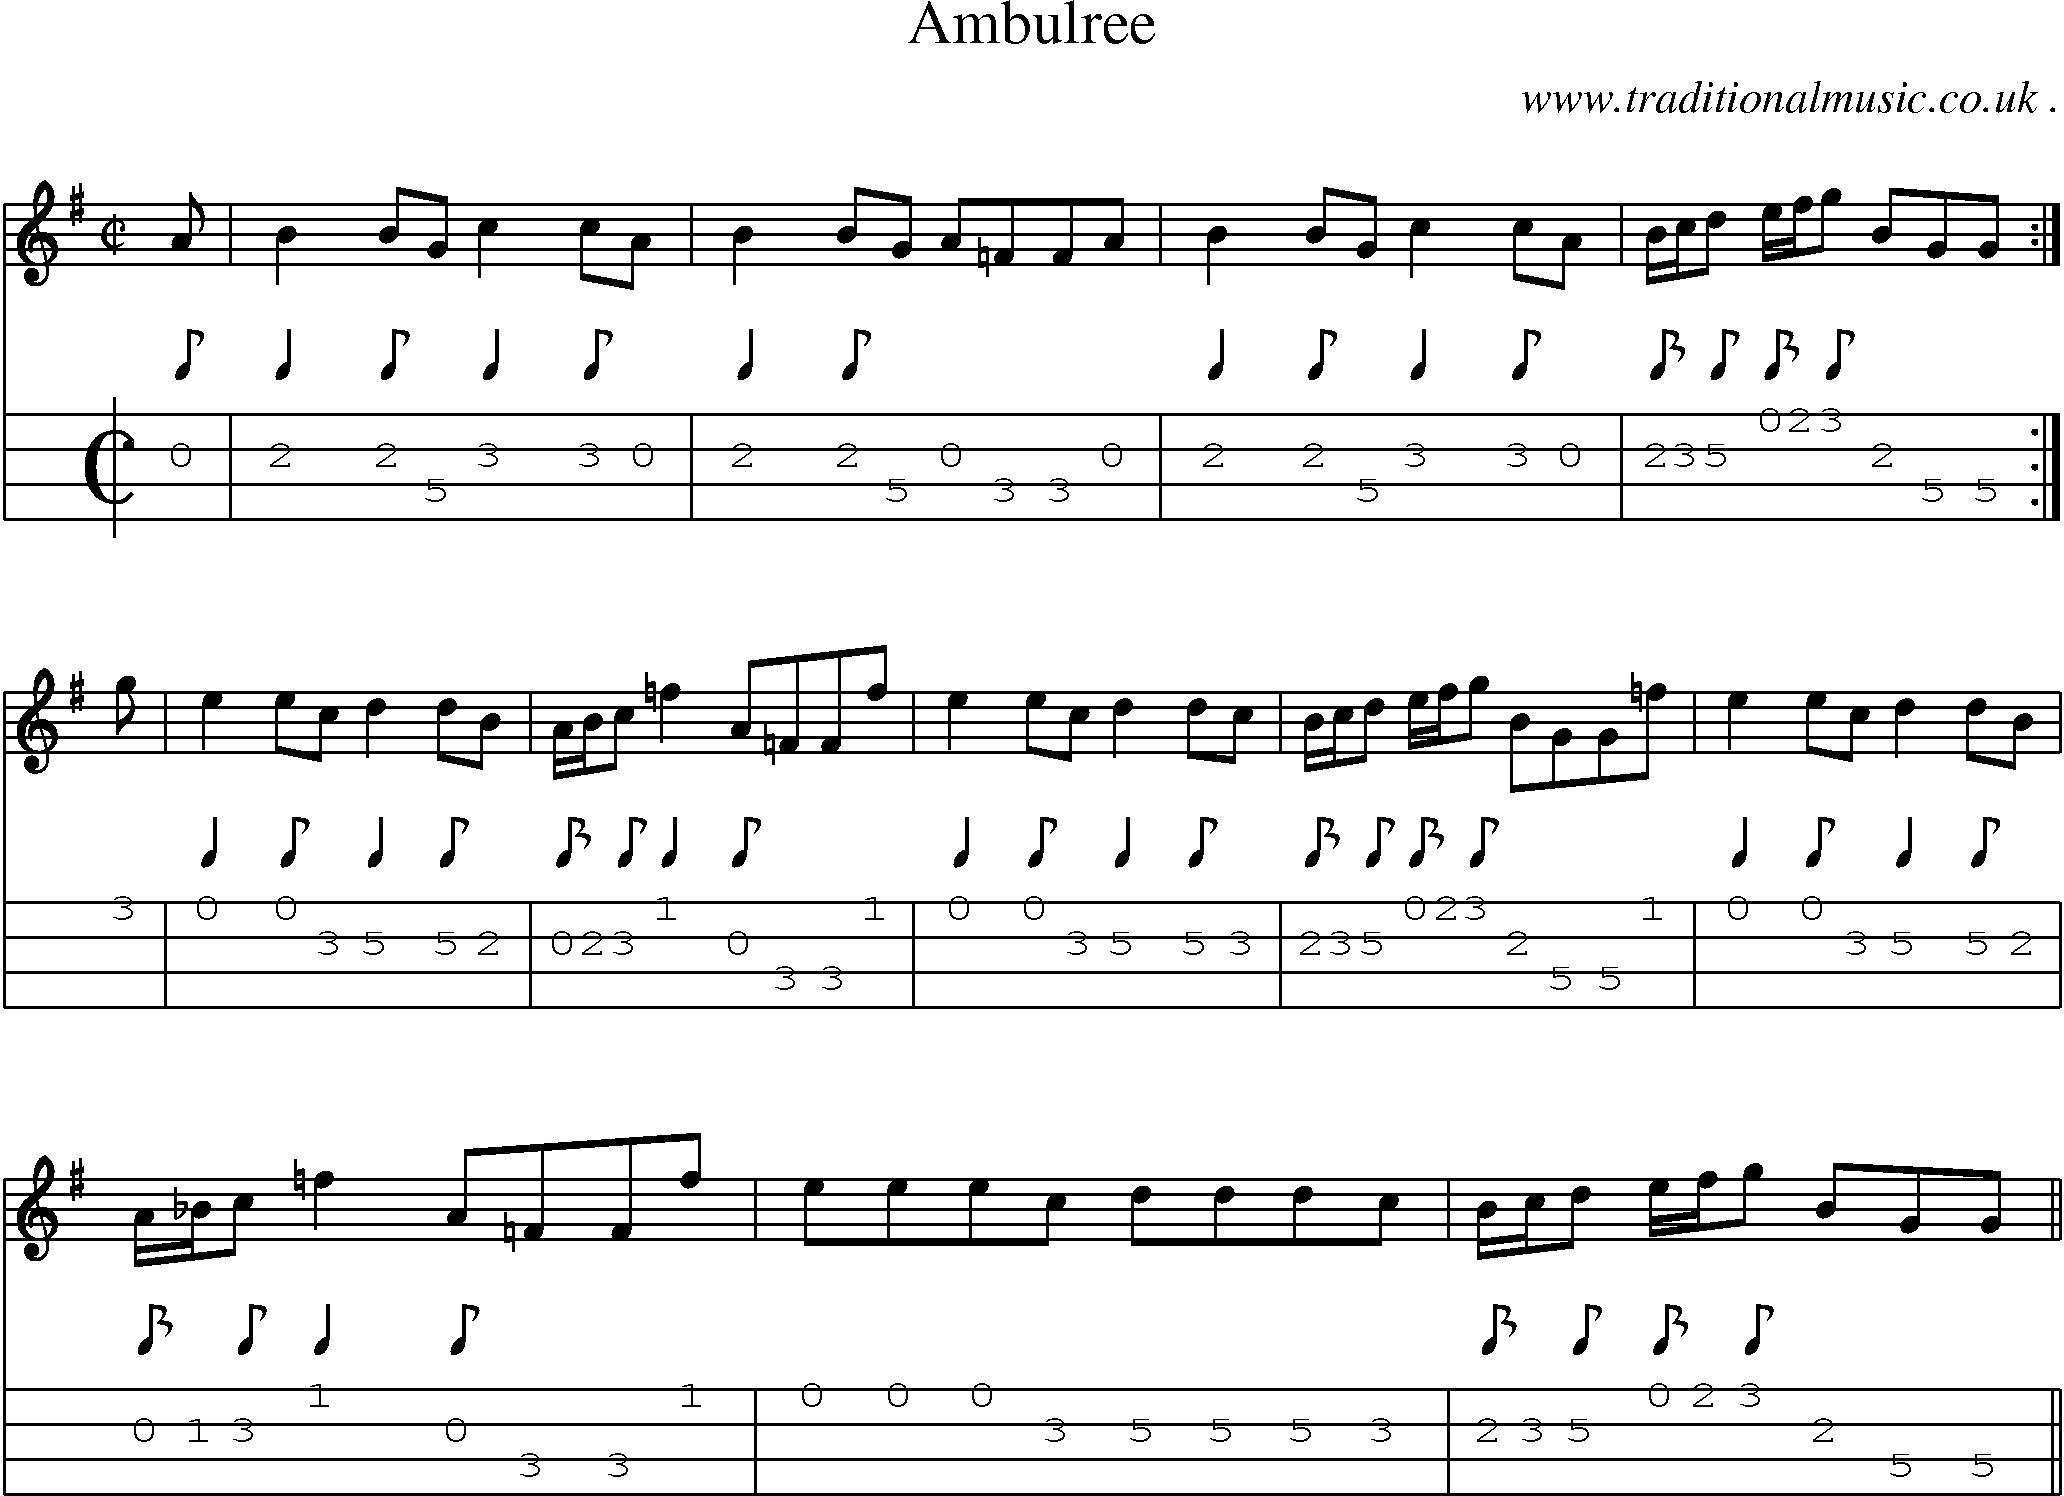 Sheet-music  score, Chords and Mandolin Tabs for Ambulree